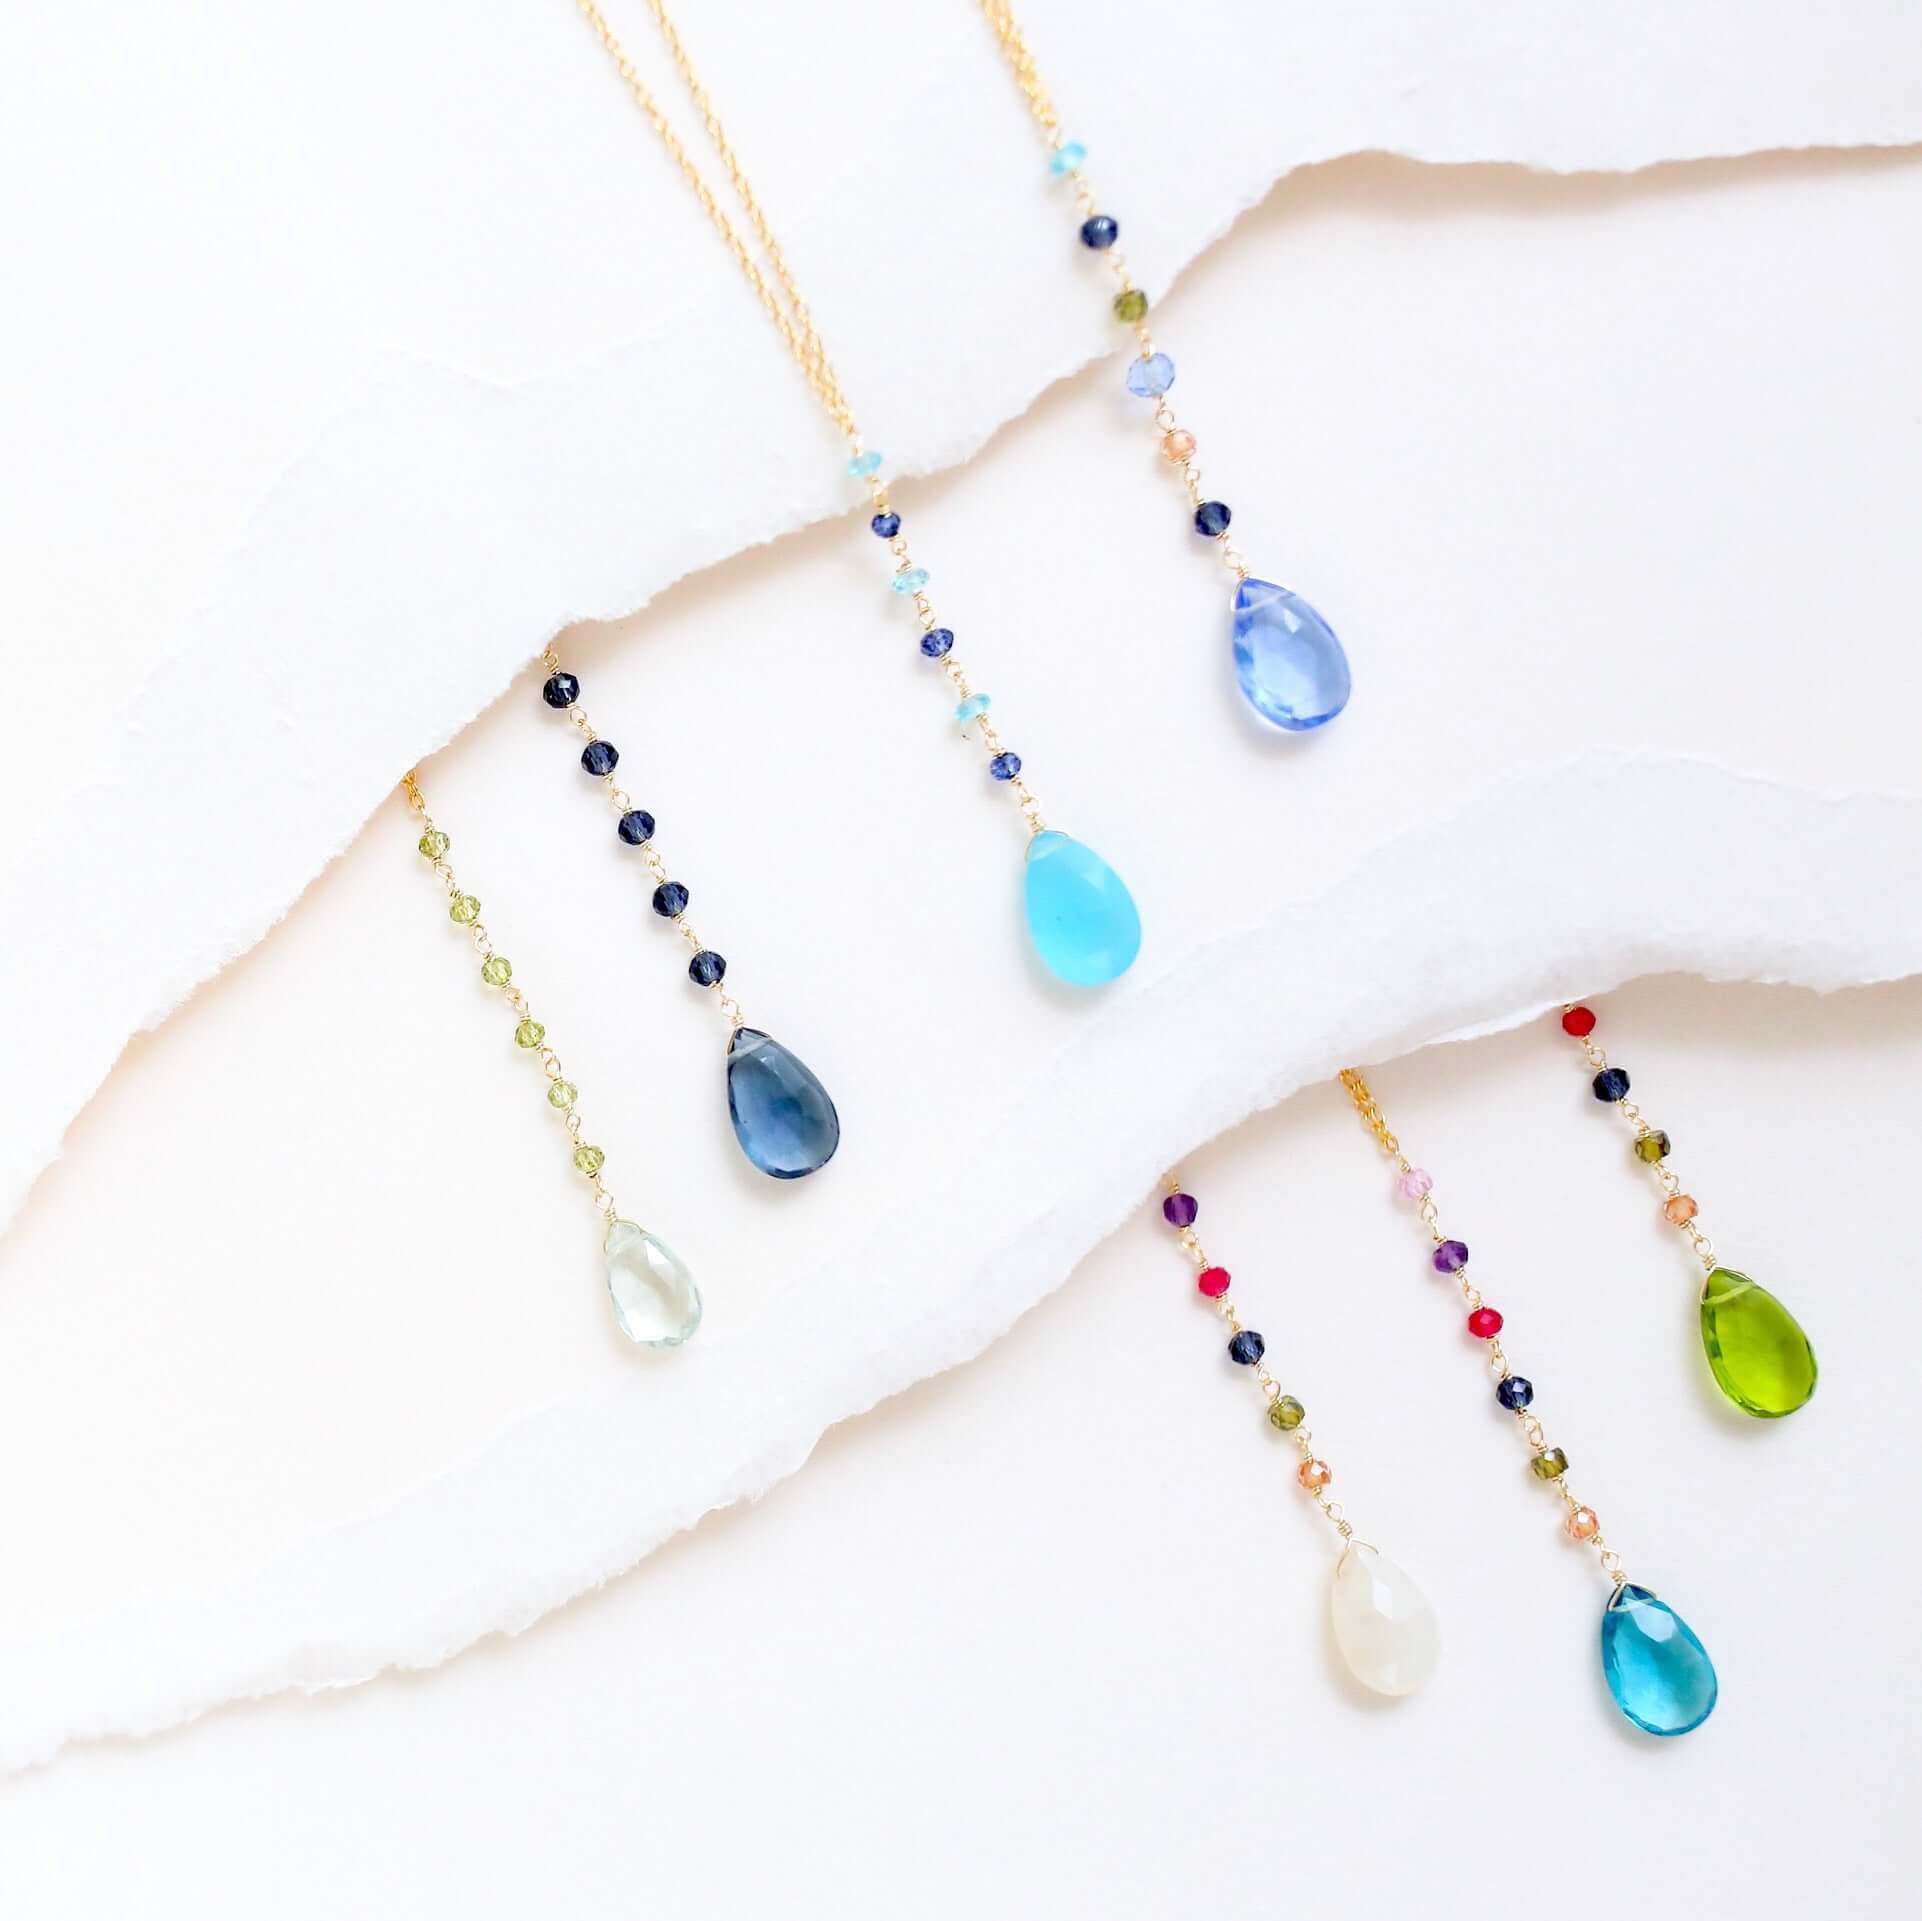 Colorful Yoga Pendant Necklaces with 2-Inch Drop in Gleaming Gold